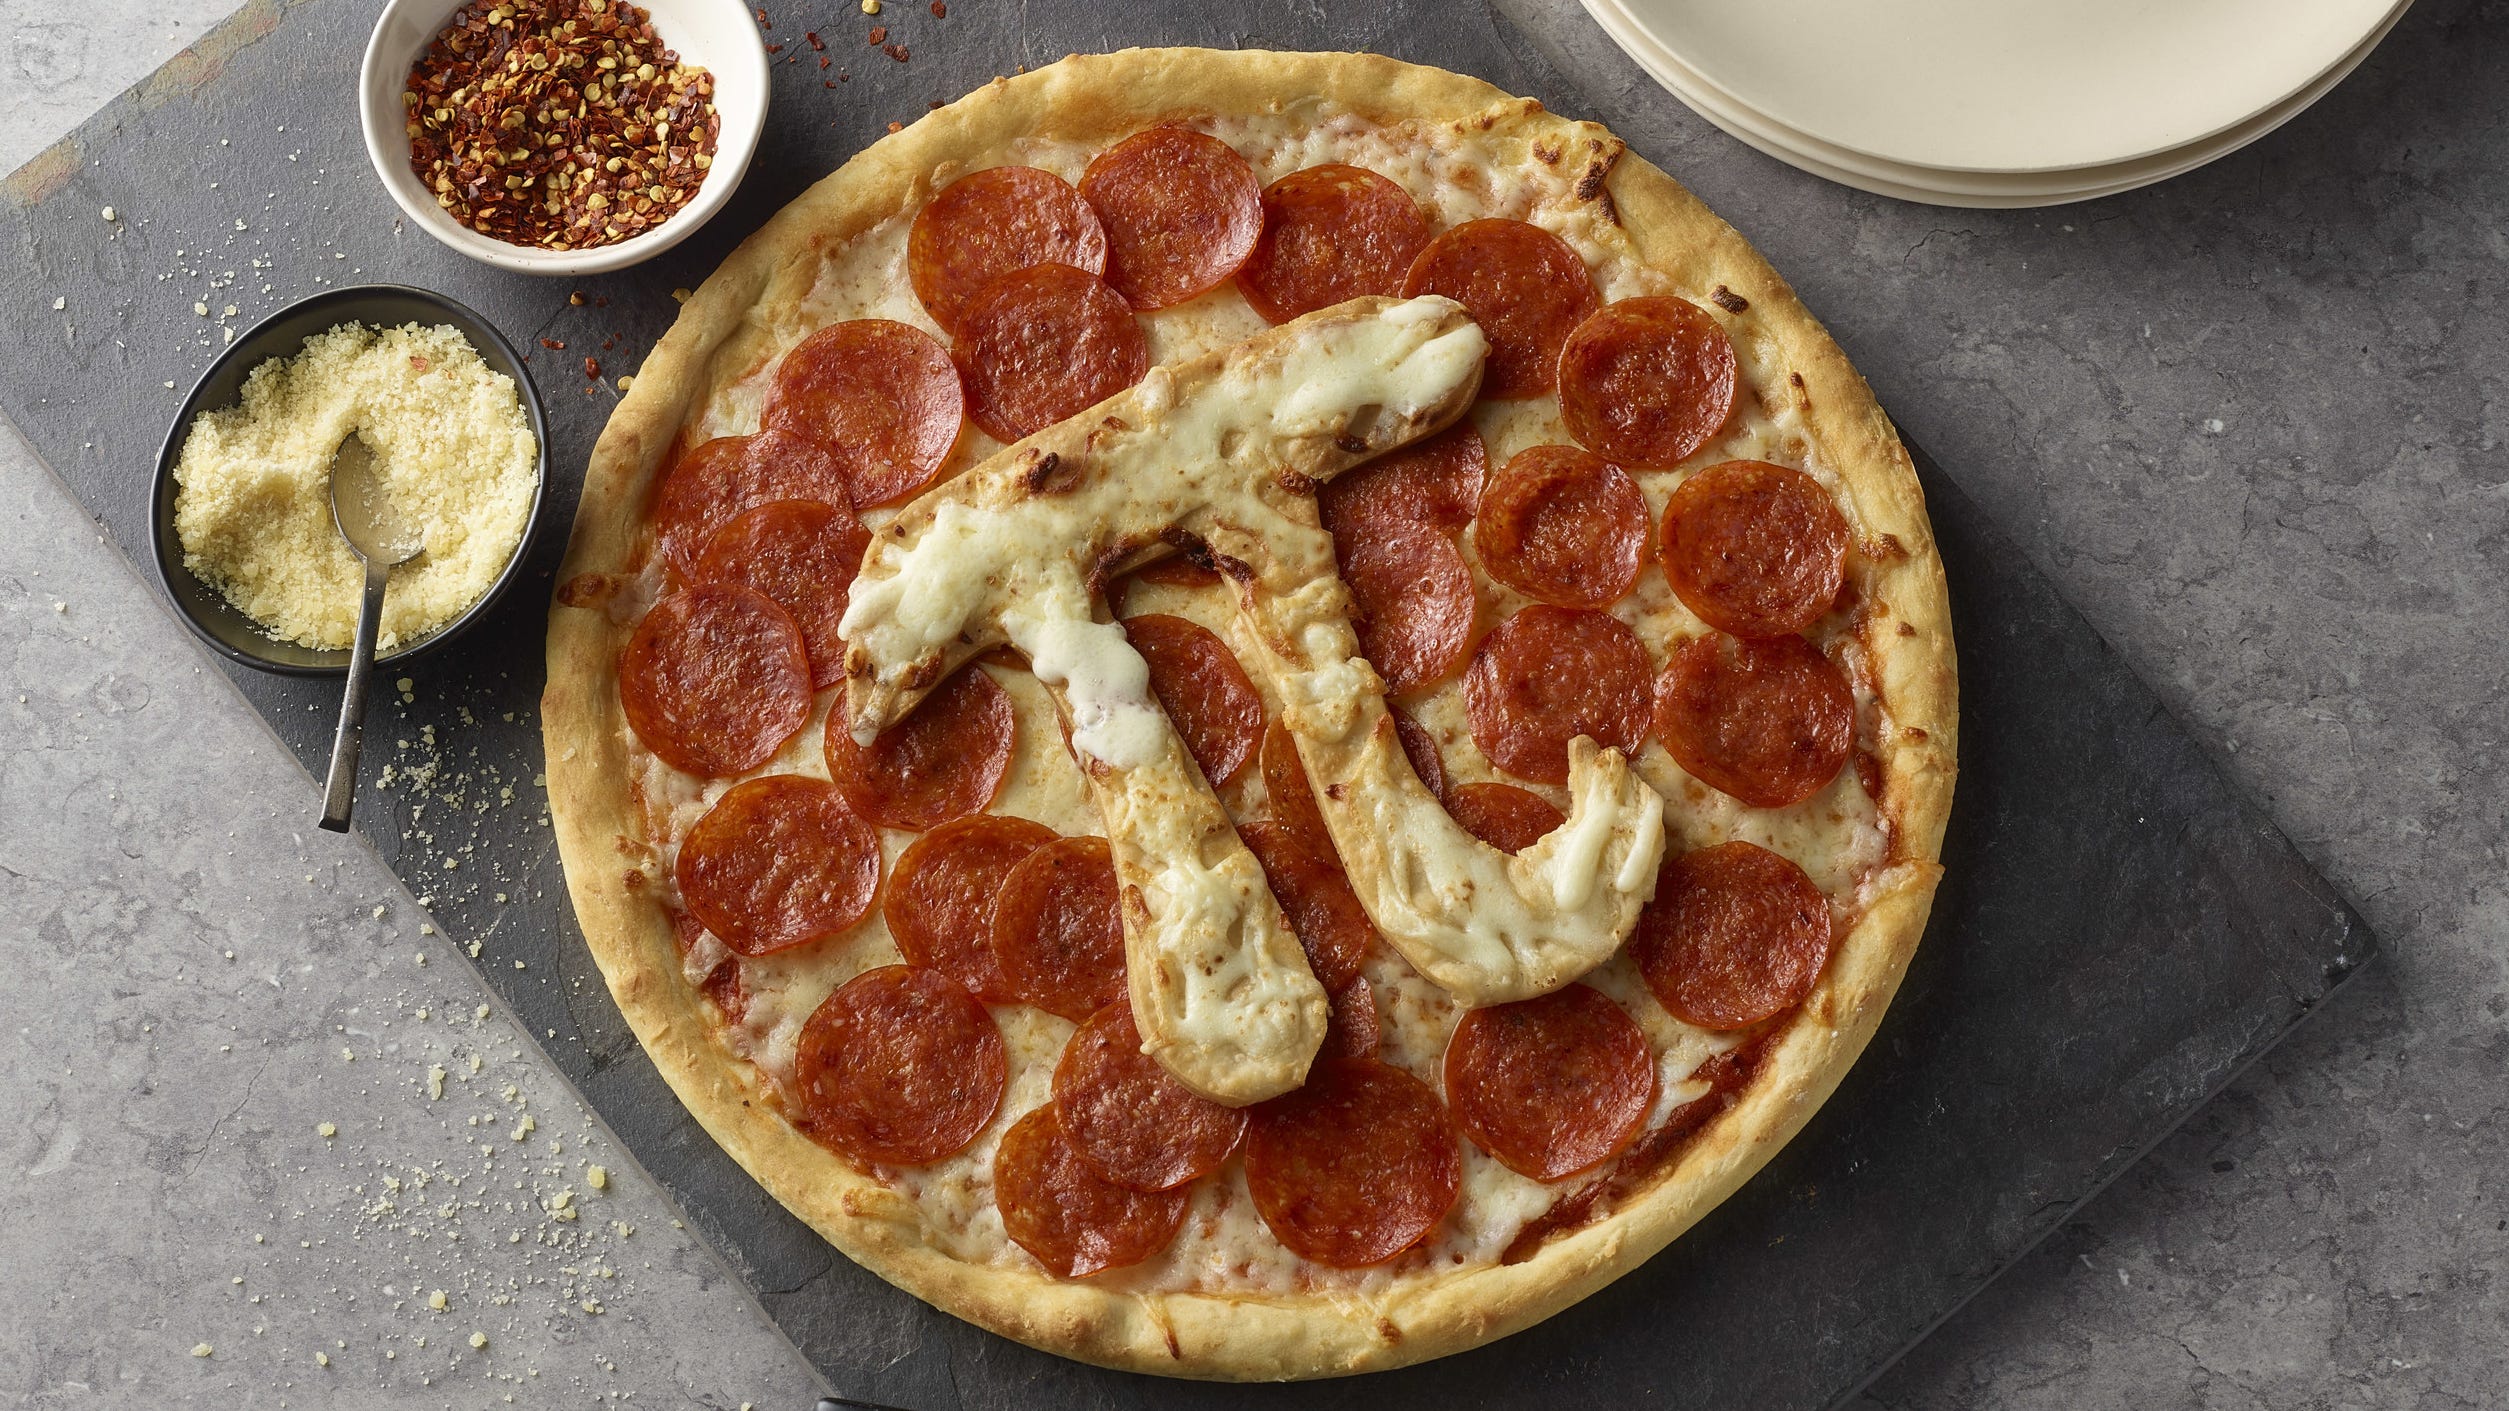 Pi Day deals 2022 Save on pizza, pies March 14 at Blaze, 7Eleven